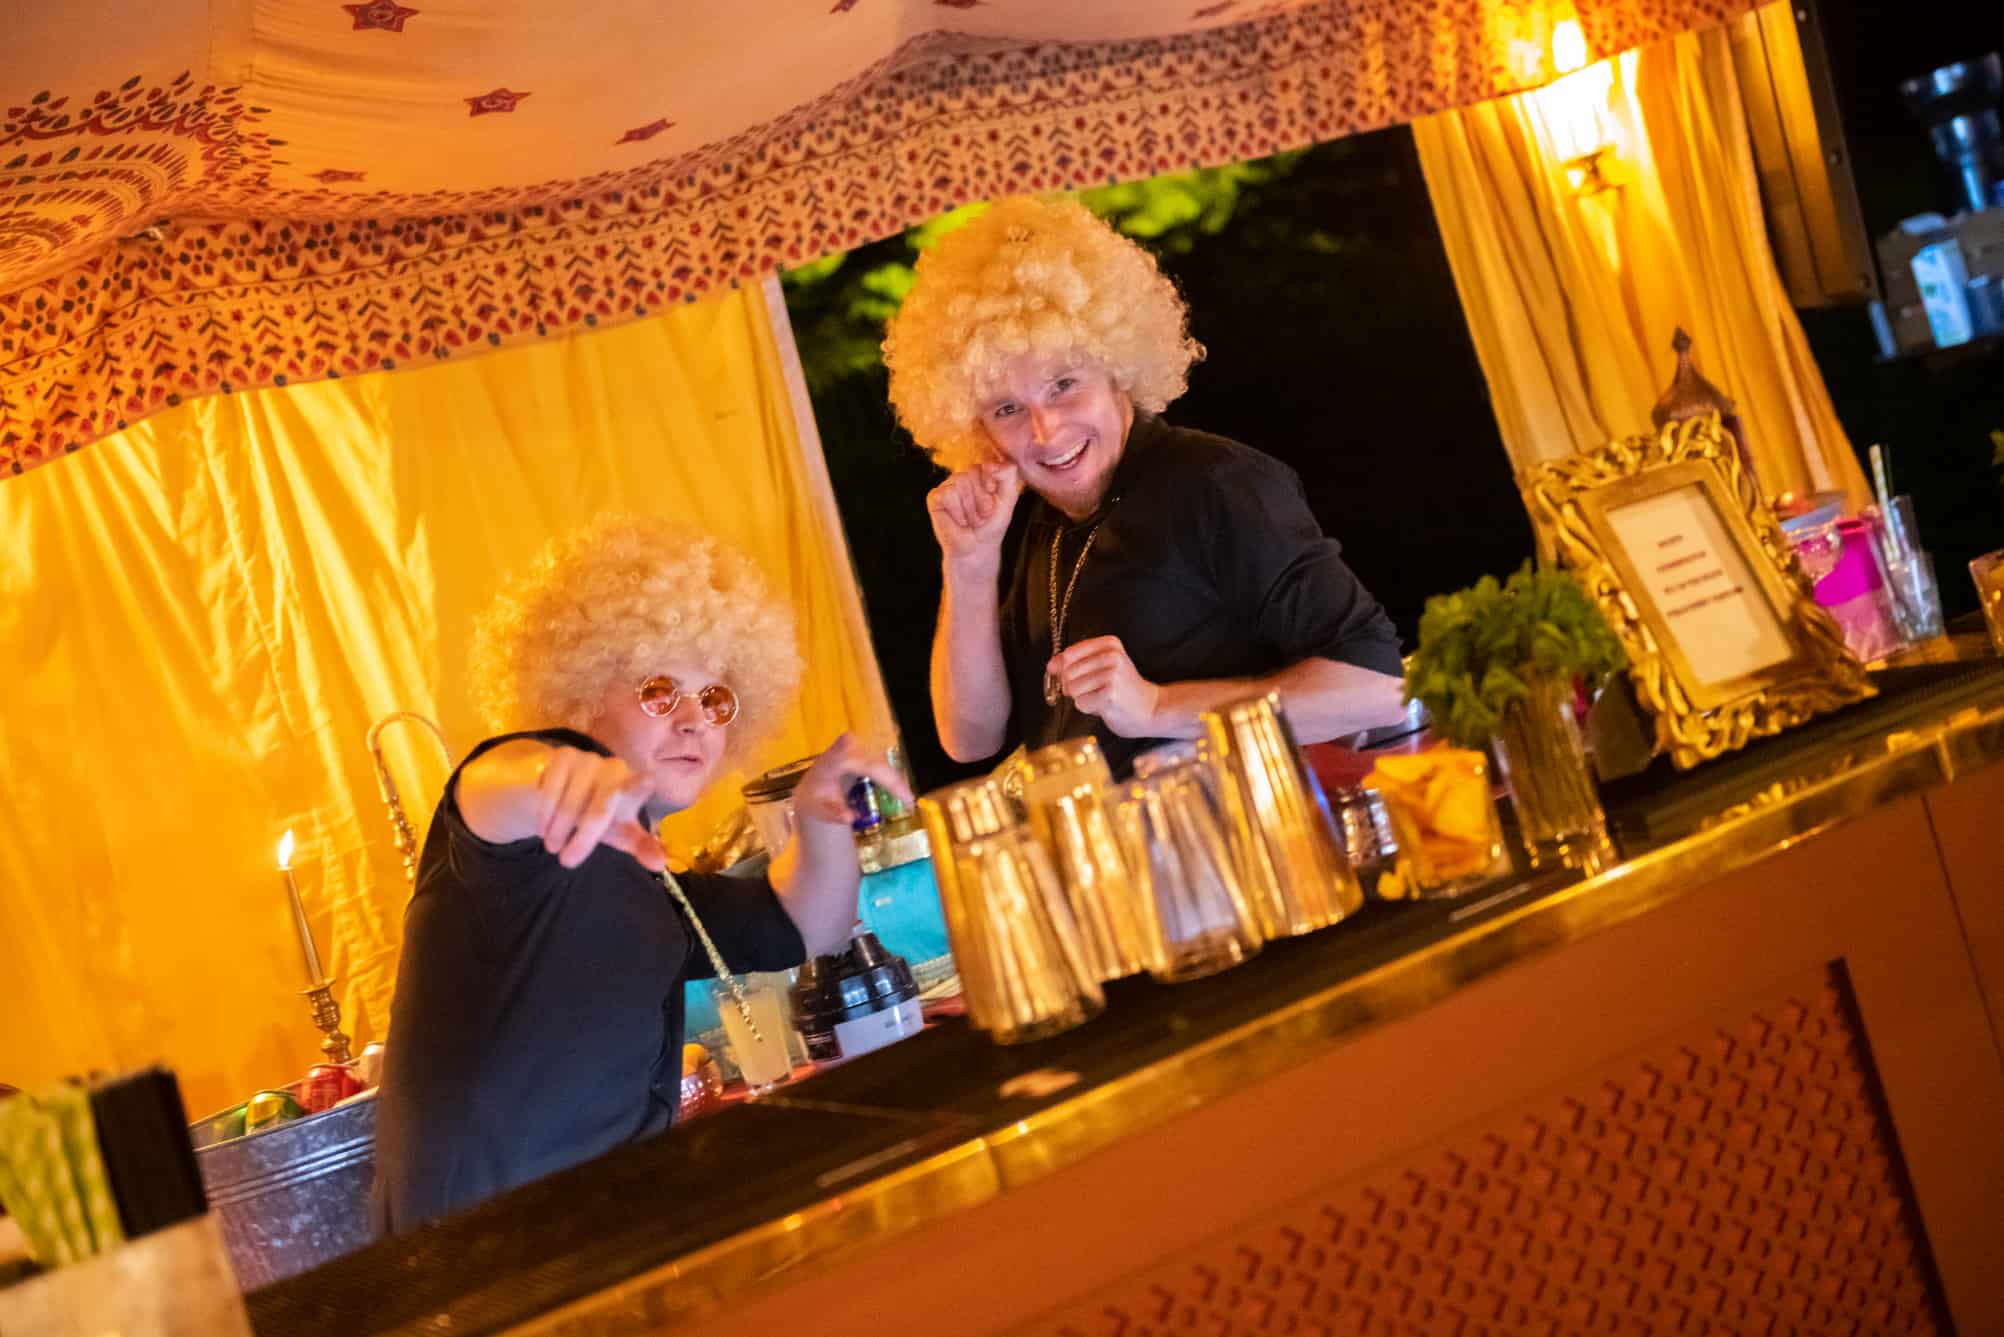 70s style bar staff at Arabian party